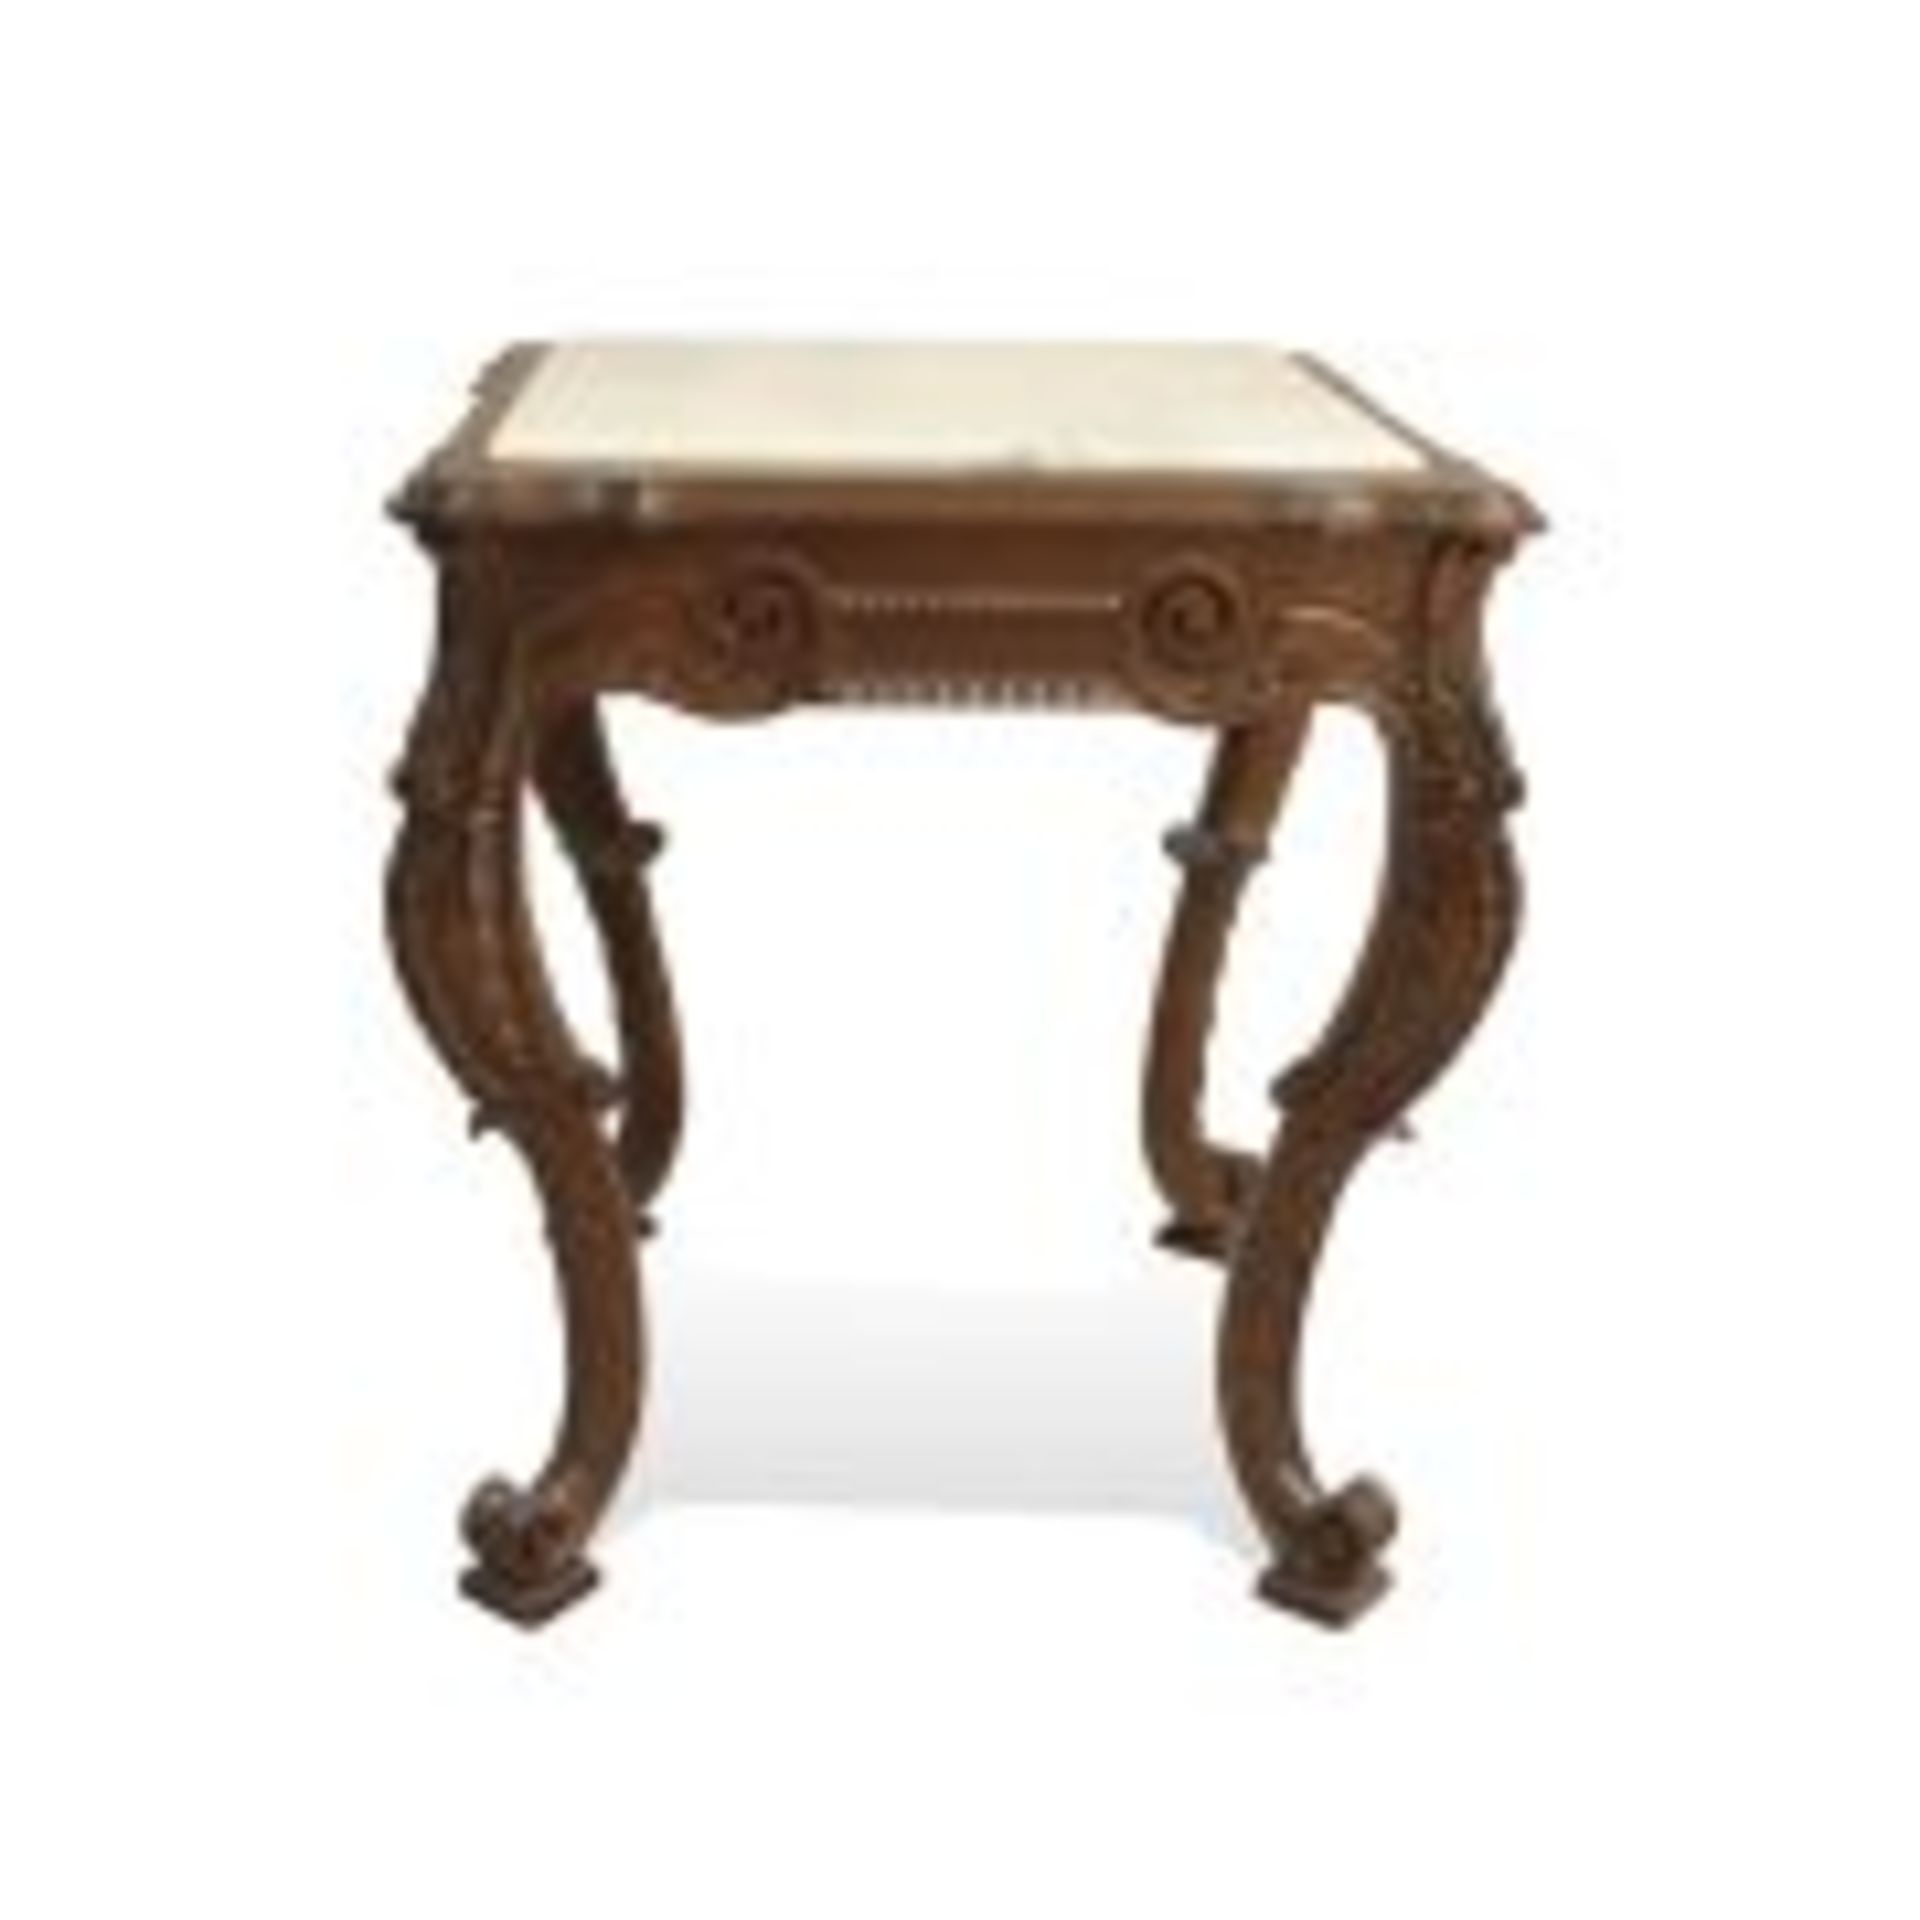 ATHENA ACCENT TABLE, SOLID KILN-DRIED HARDWOOD FRAME CONSTRUCTION W/ DOUBLE-DOWELLED AND CORNER - Bild 2 aus 3